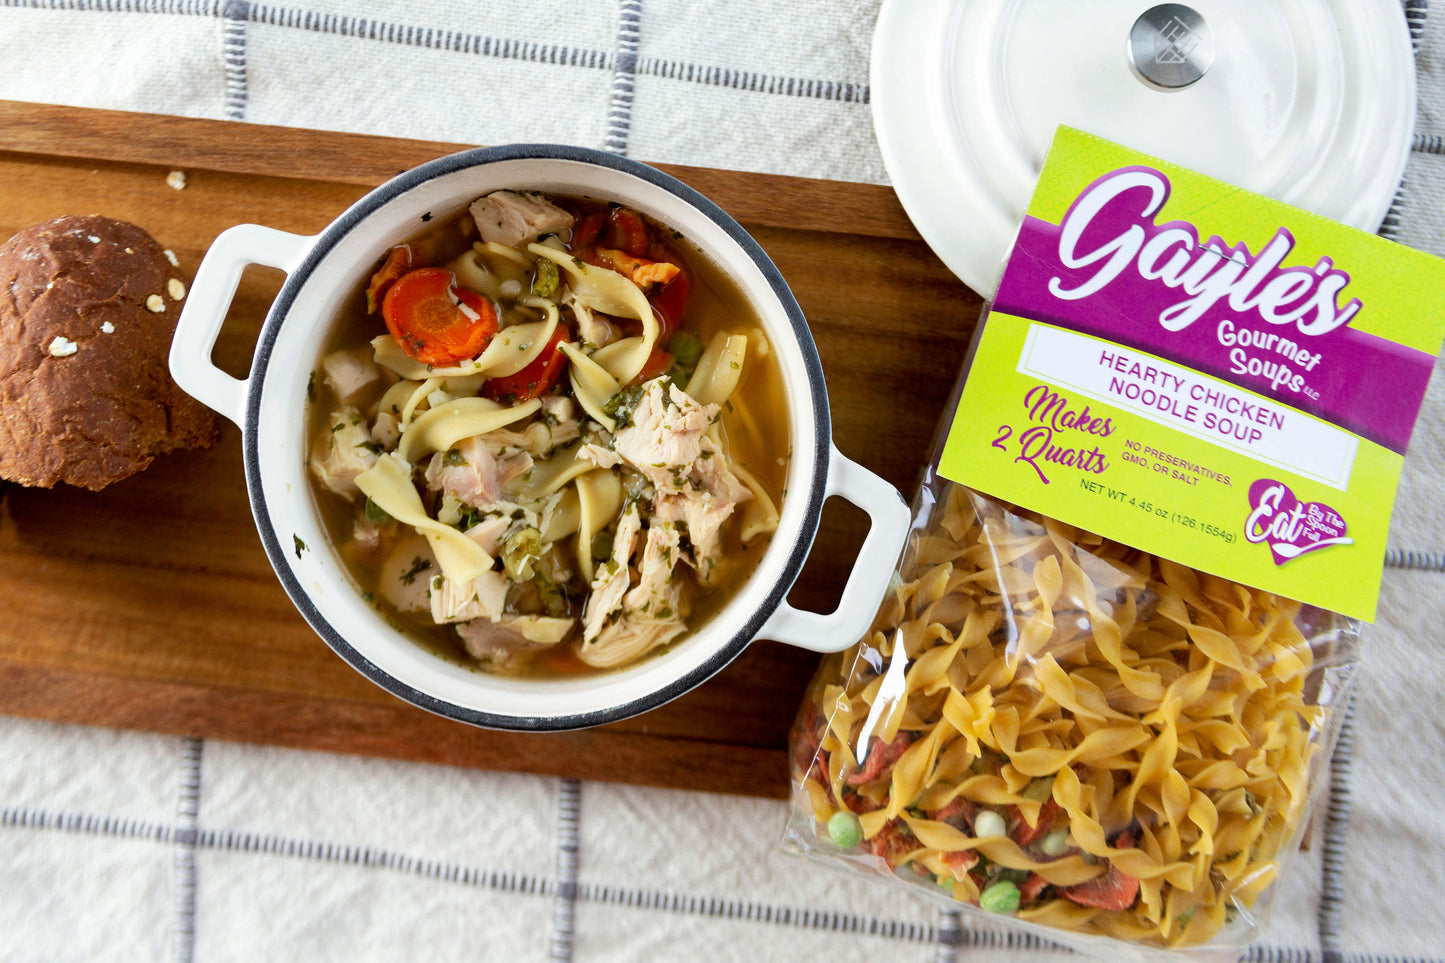 6-Pack of Gayle's Gourmet Soups w/ Free Ladle - includes yellow bag